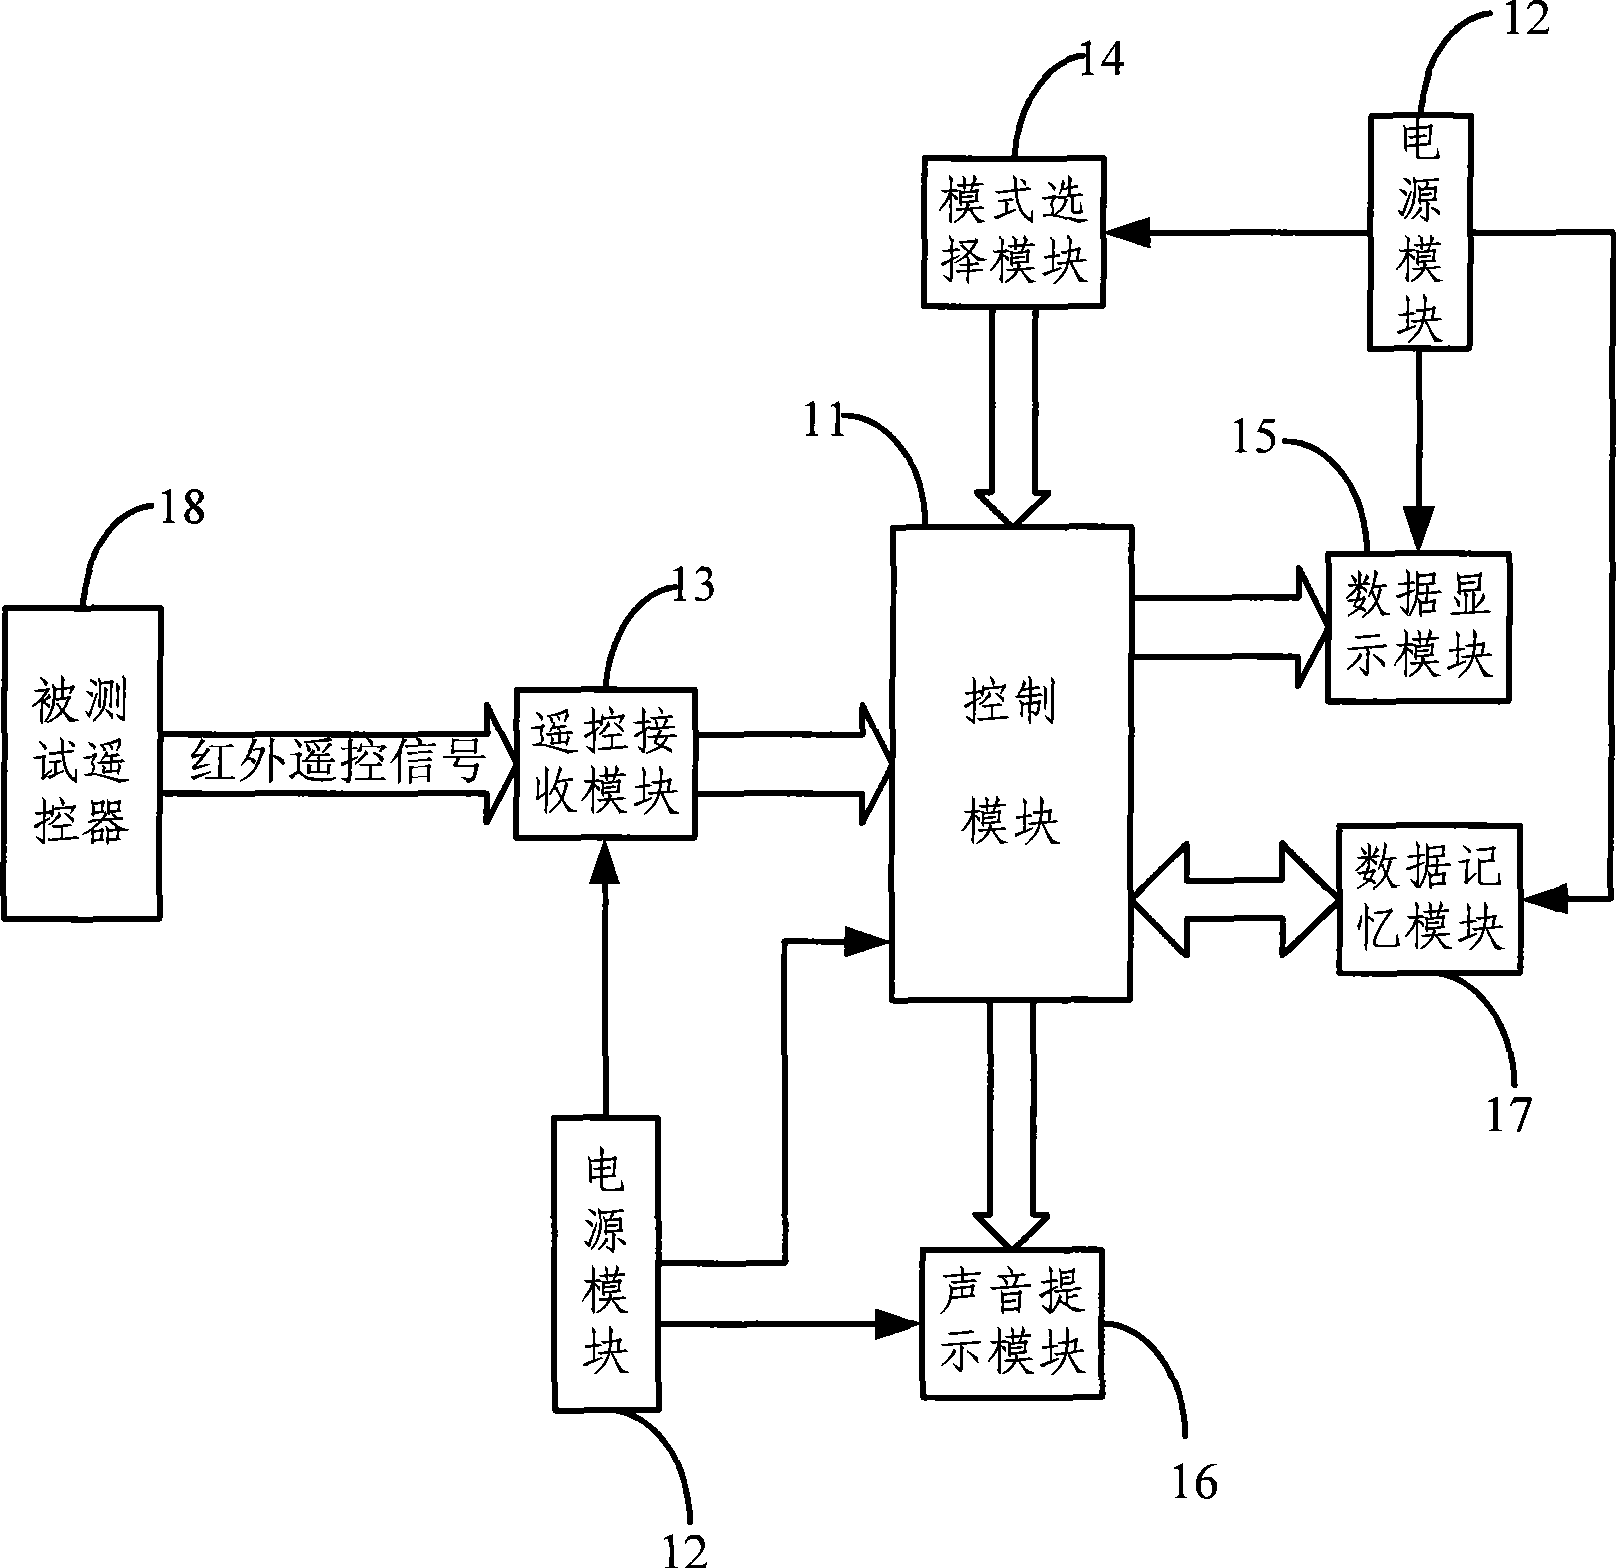 Transmission code detection device for remote controller